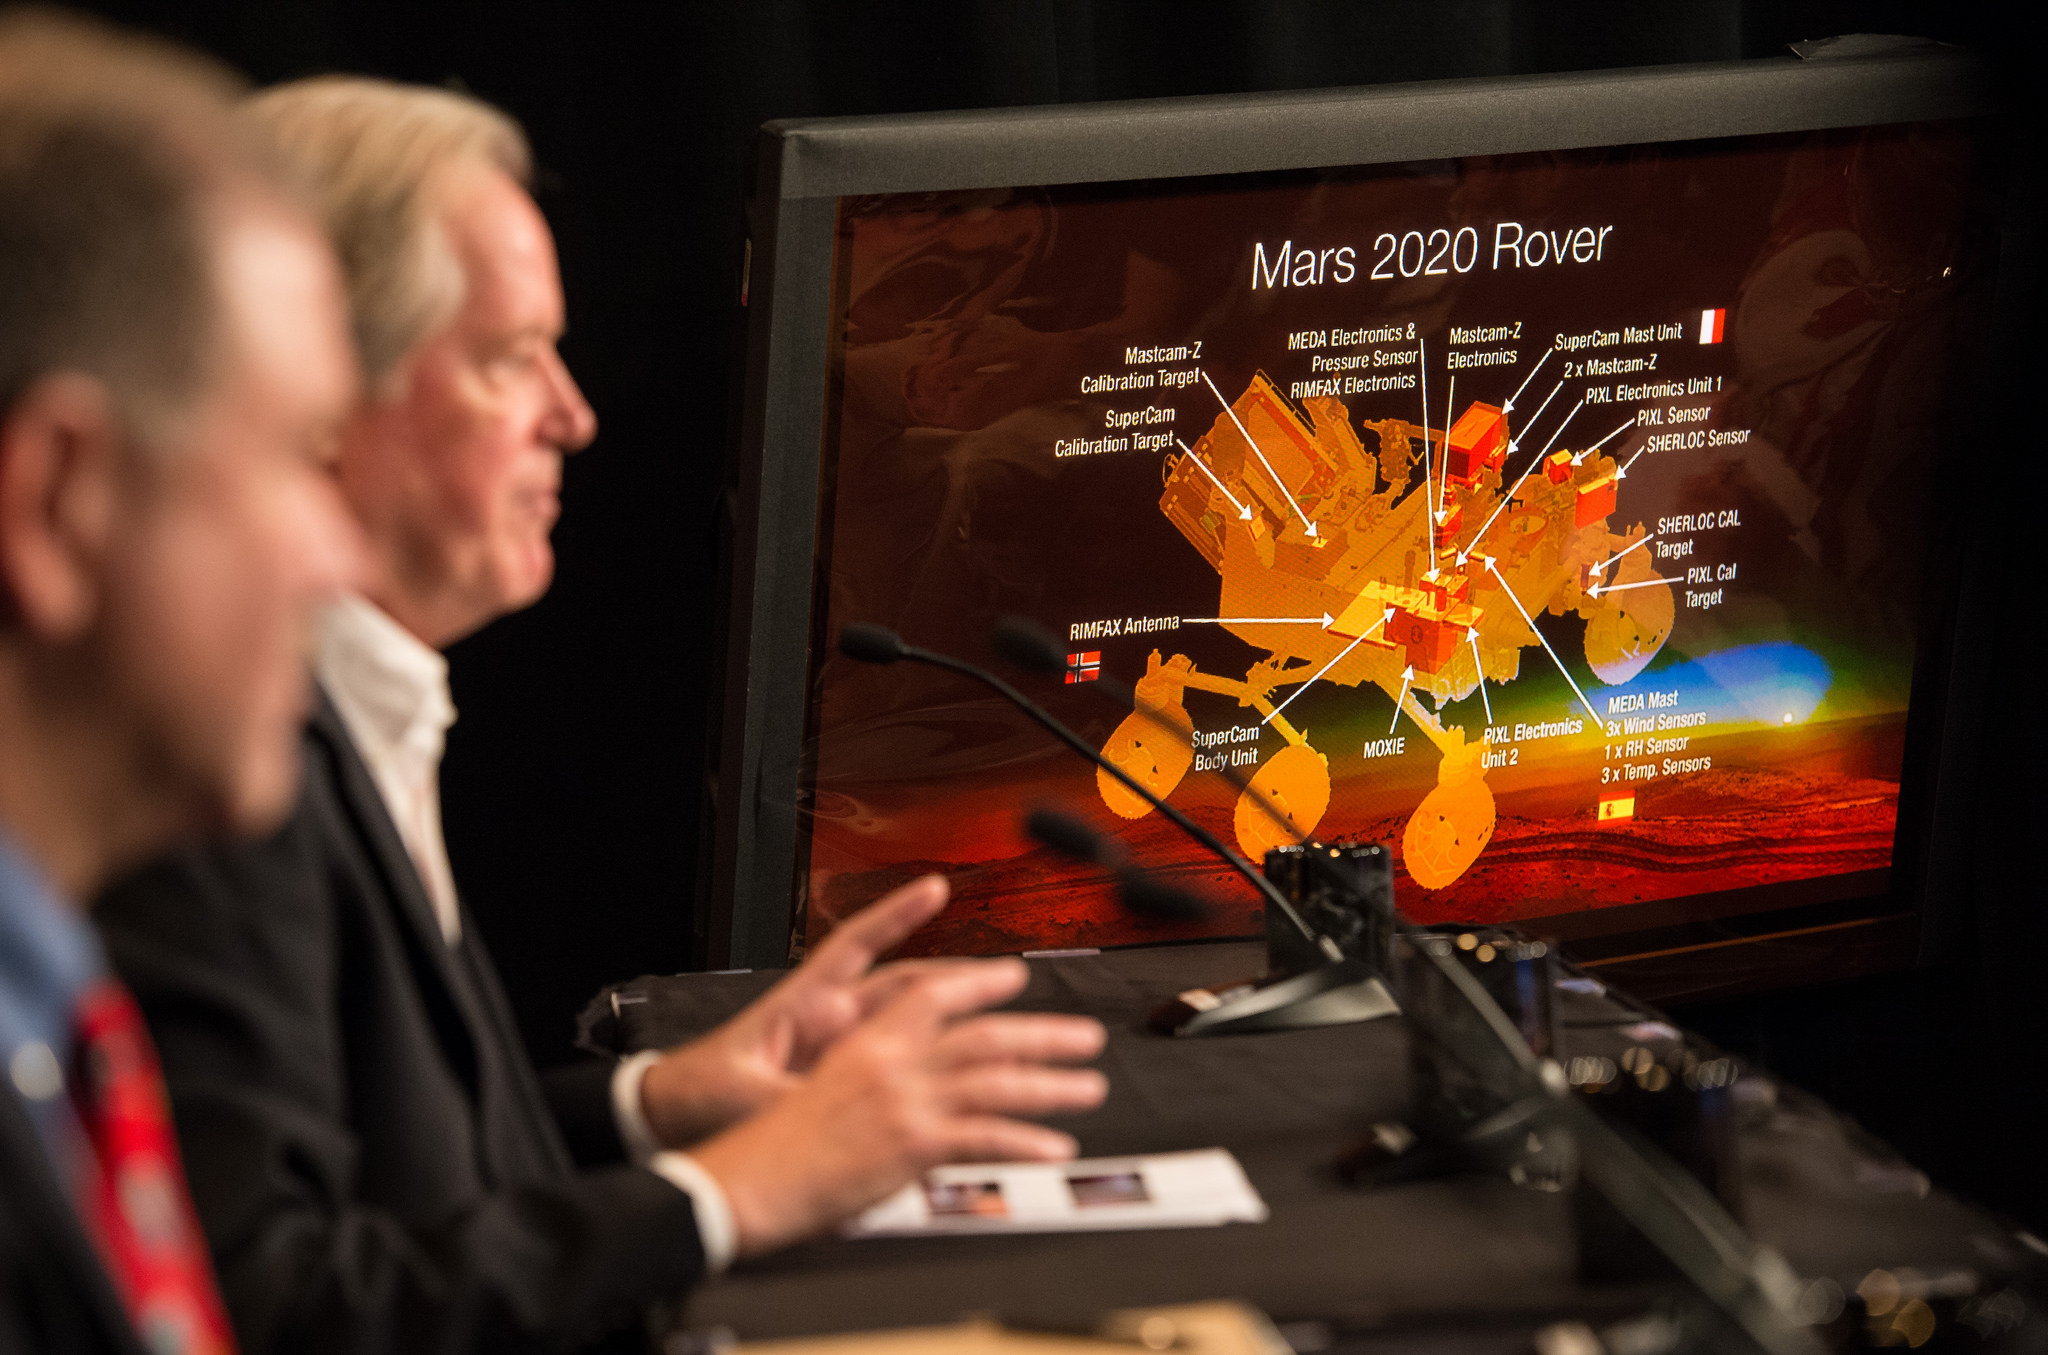 NASA manager Michael Meyer, lead scientist for NASA's Mars Exploration Program, outlines science instrument suite selected for NASA’s next generation 2020 Mars rover at media briefing held at NASA Headquarters on July 31, 2014.    Credit: NASA